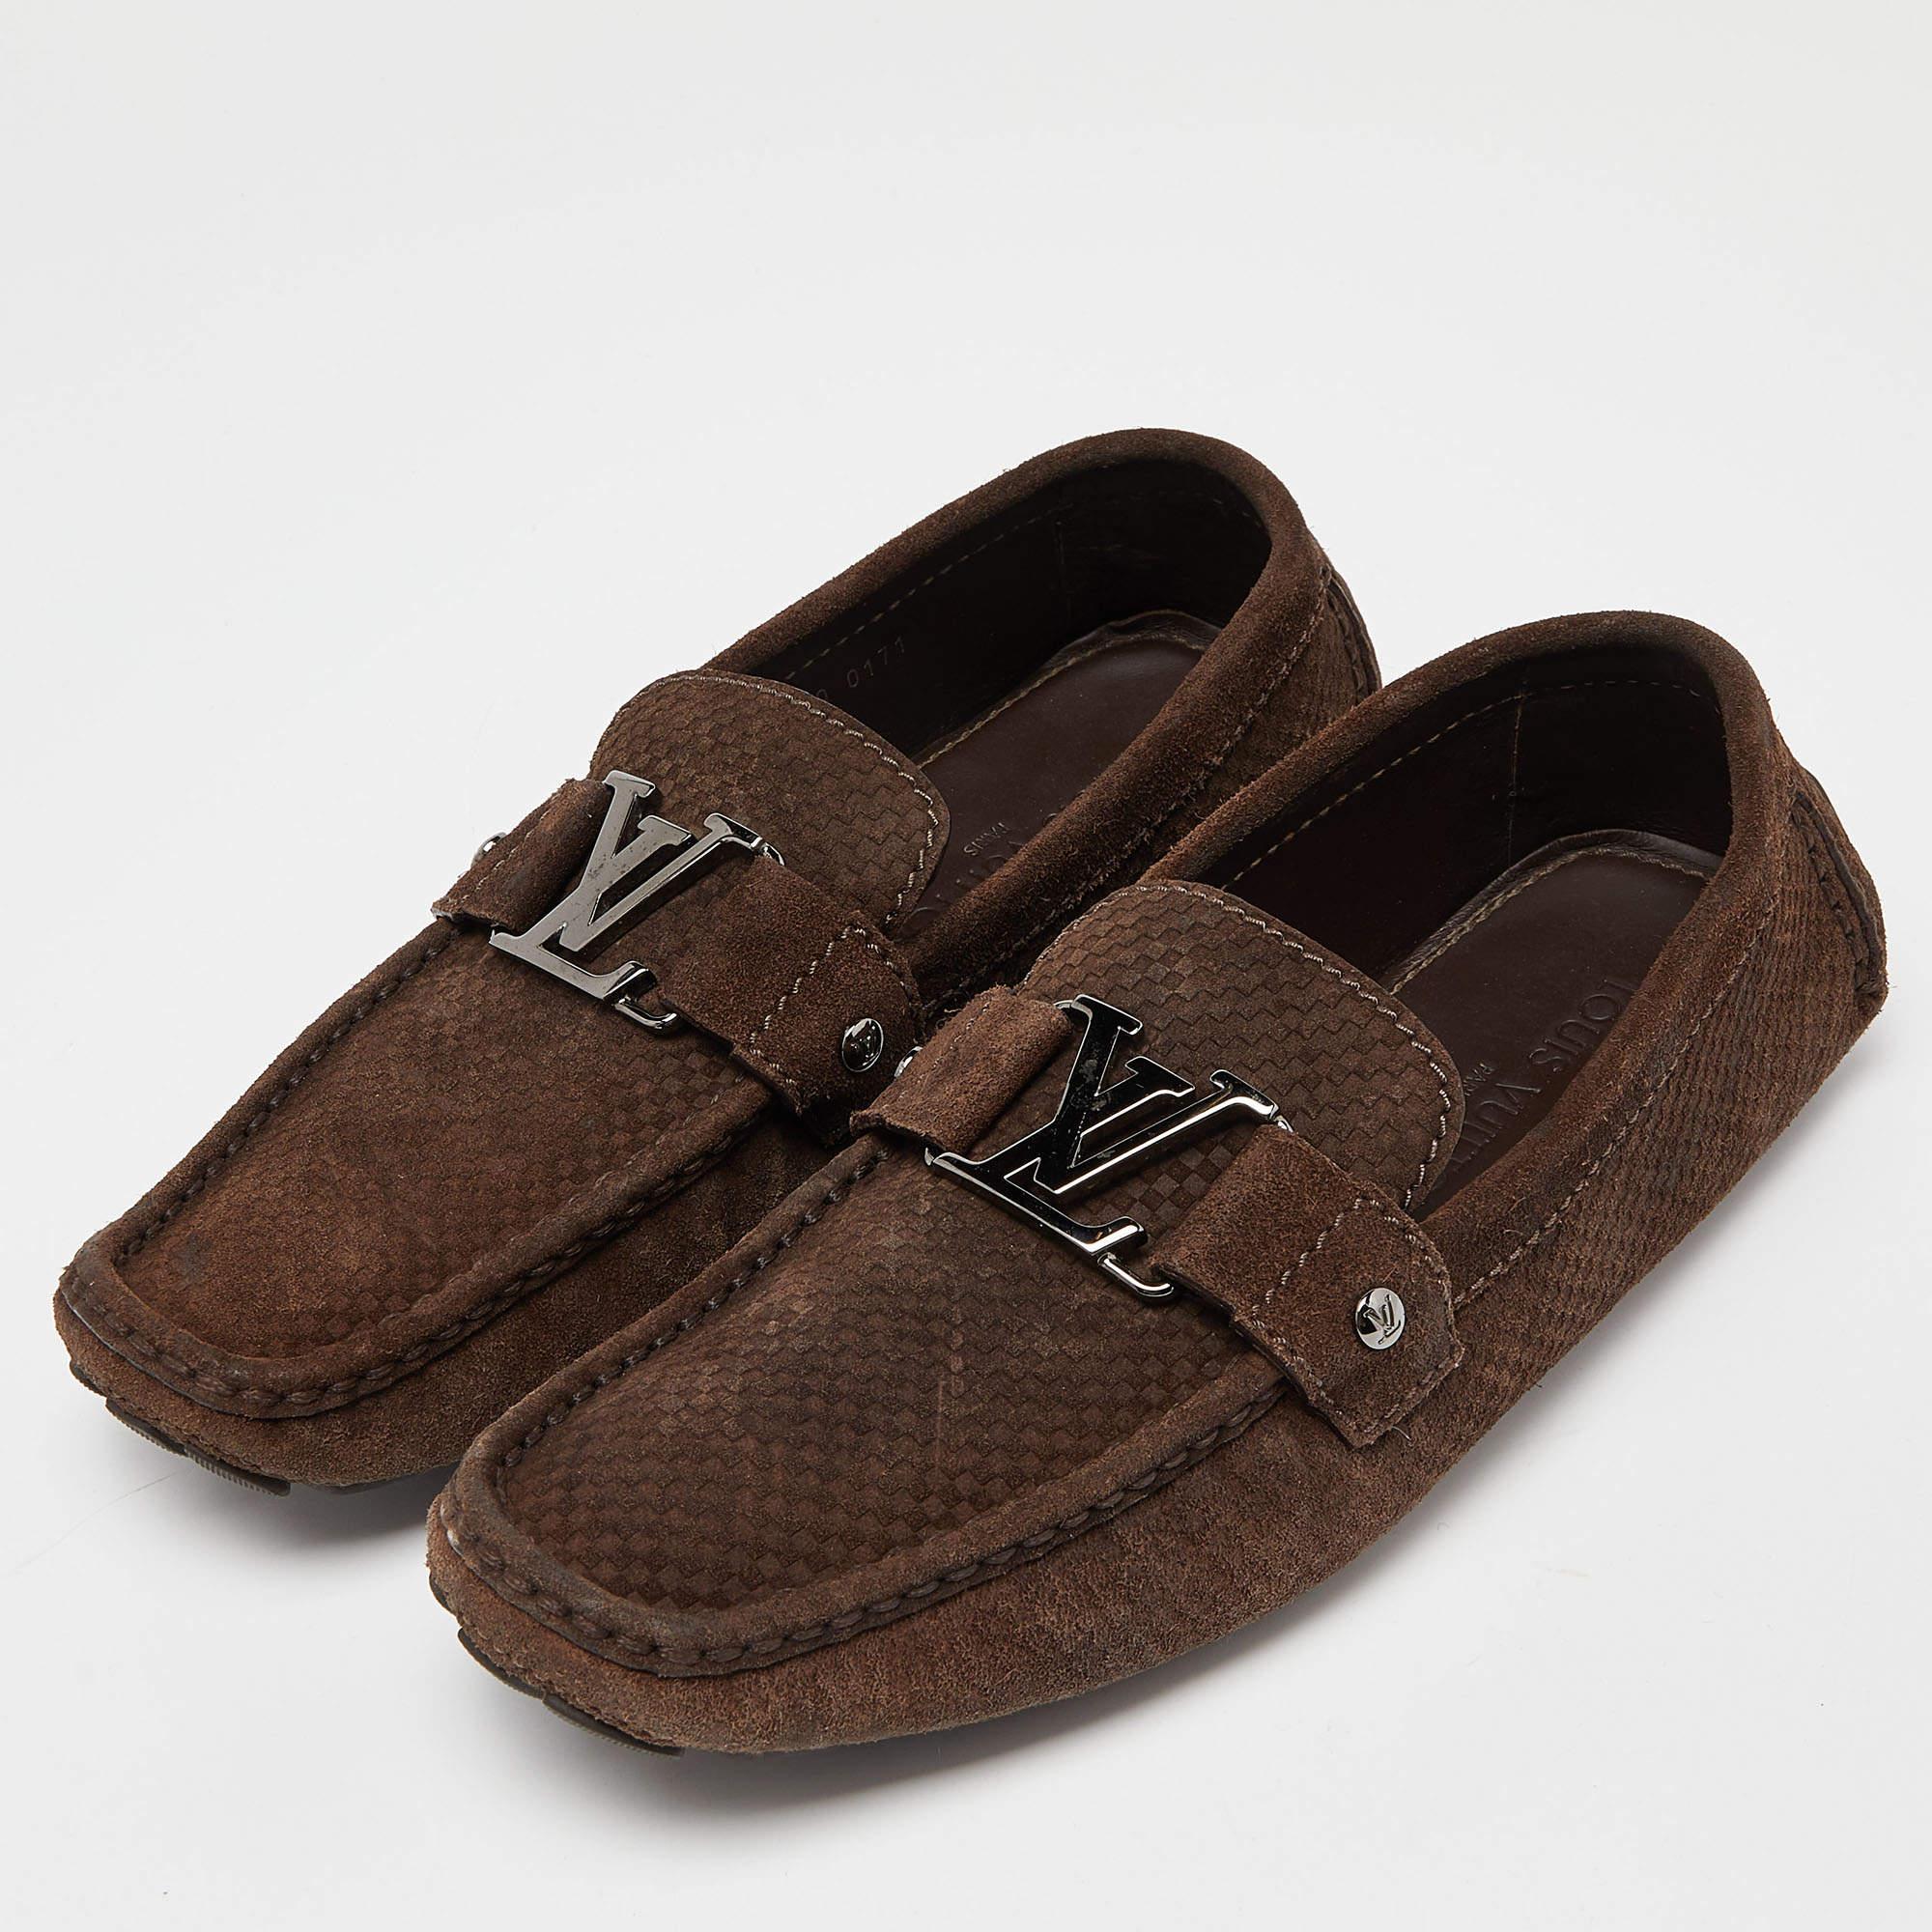 Look sharp and neat with this pair of Monte Carlo loafers from Louis Vuitton. They have been crafted from brown suede and designed with the art of fine stitching and the signature LV on the uppers. The pair is complete with comfortable insoles and